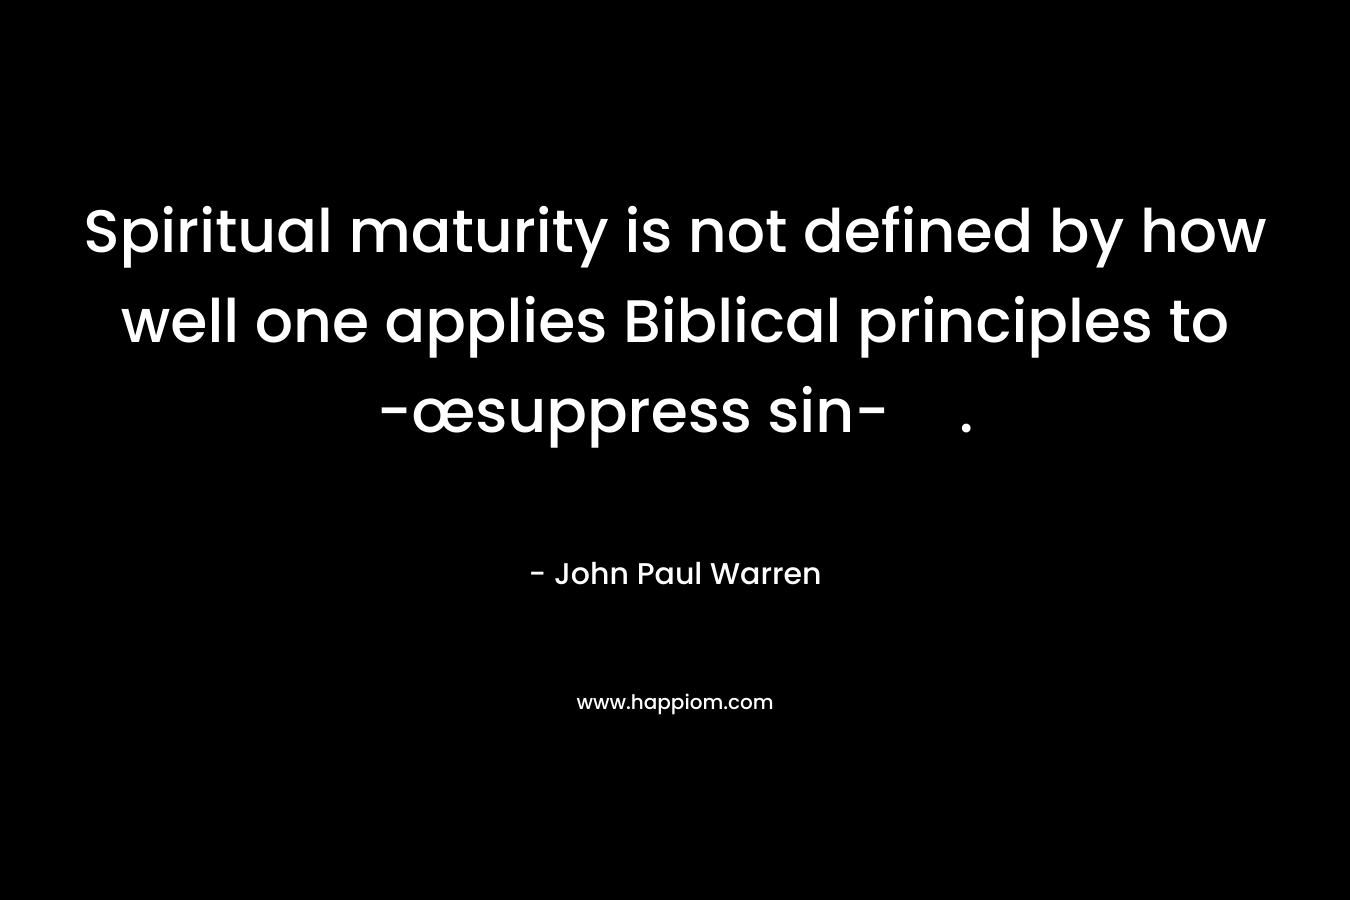 Spiritual maturity is not defined by how well one applies Biblical principles to -œsuppress sin-. – John Paul Warren